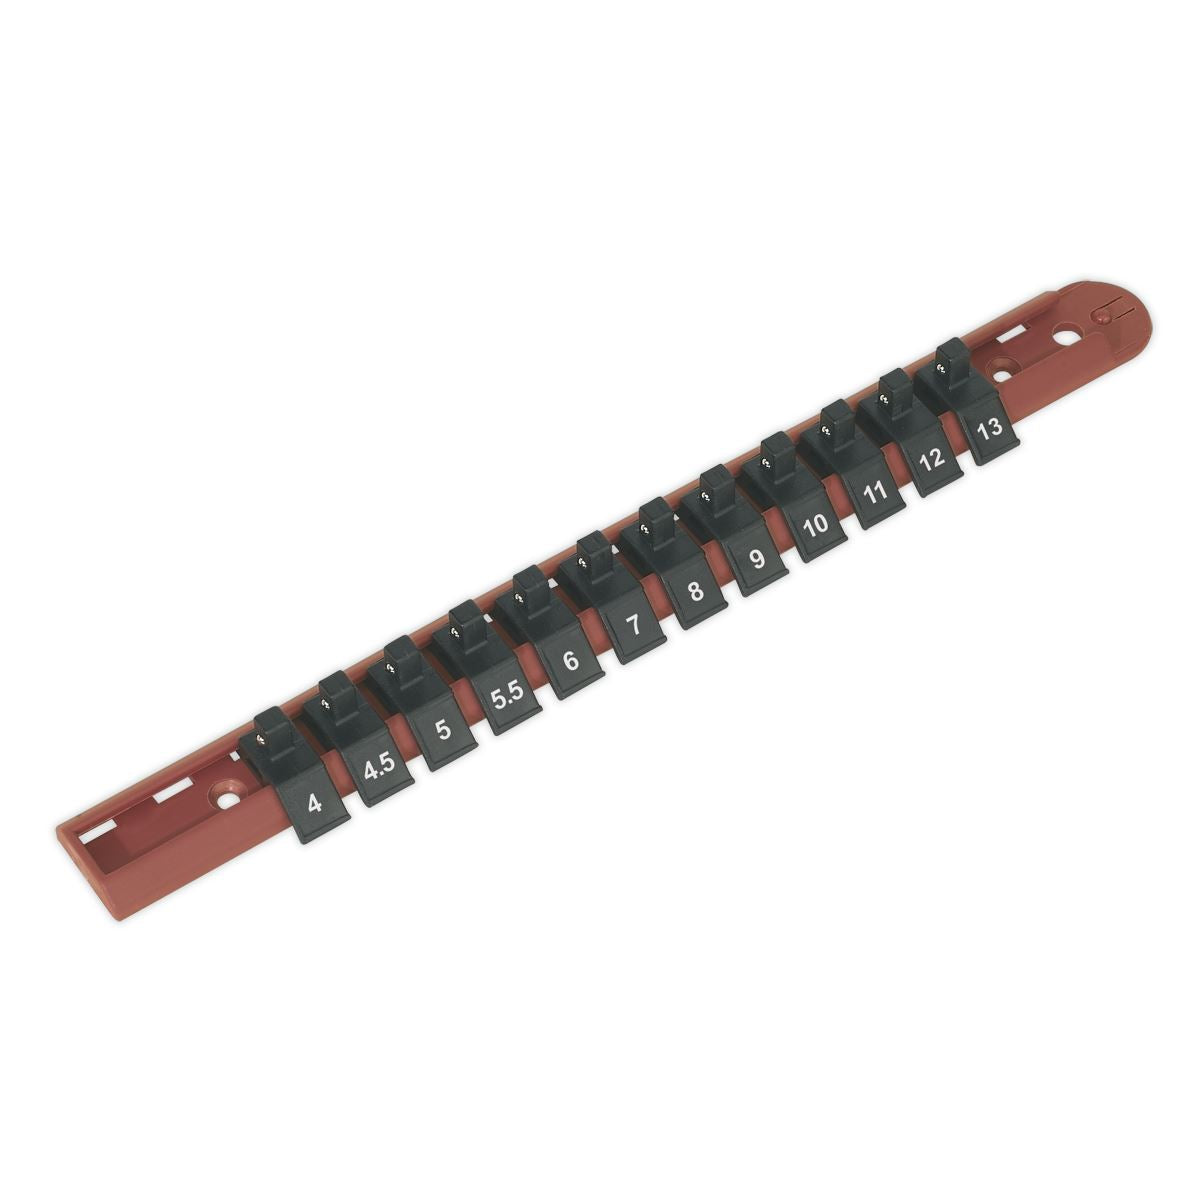 Sealey Premier Socket Retaining Rail with 12 Clips 1/4"Sq Drive